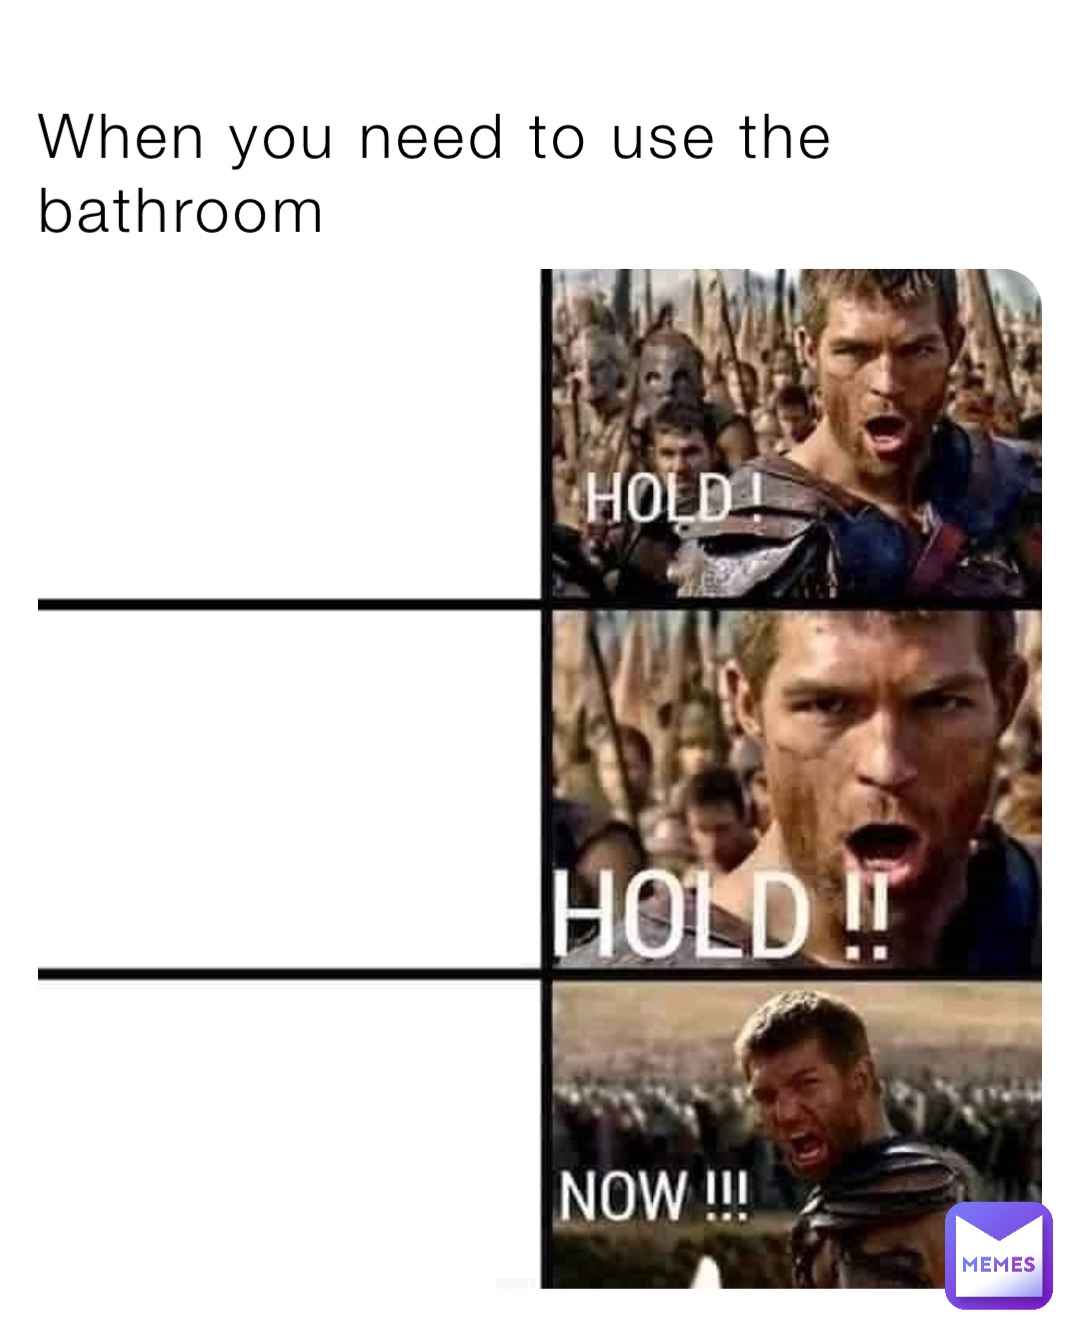 When you need to use the bathroom